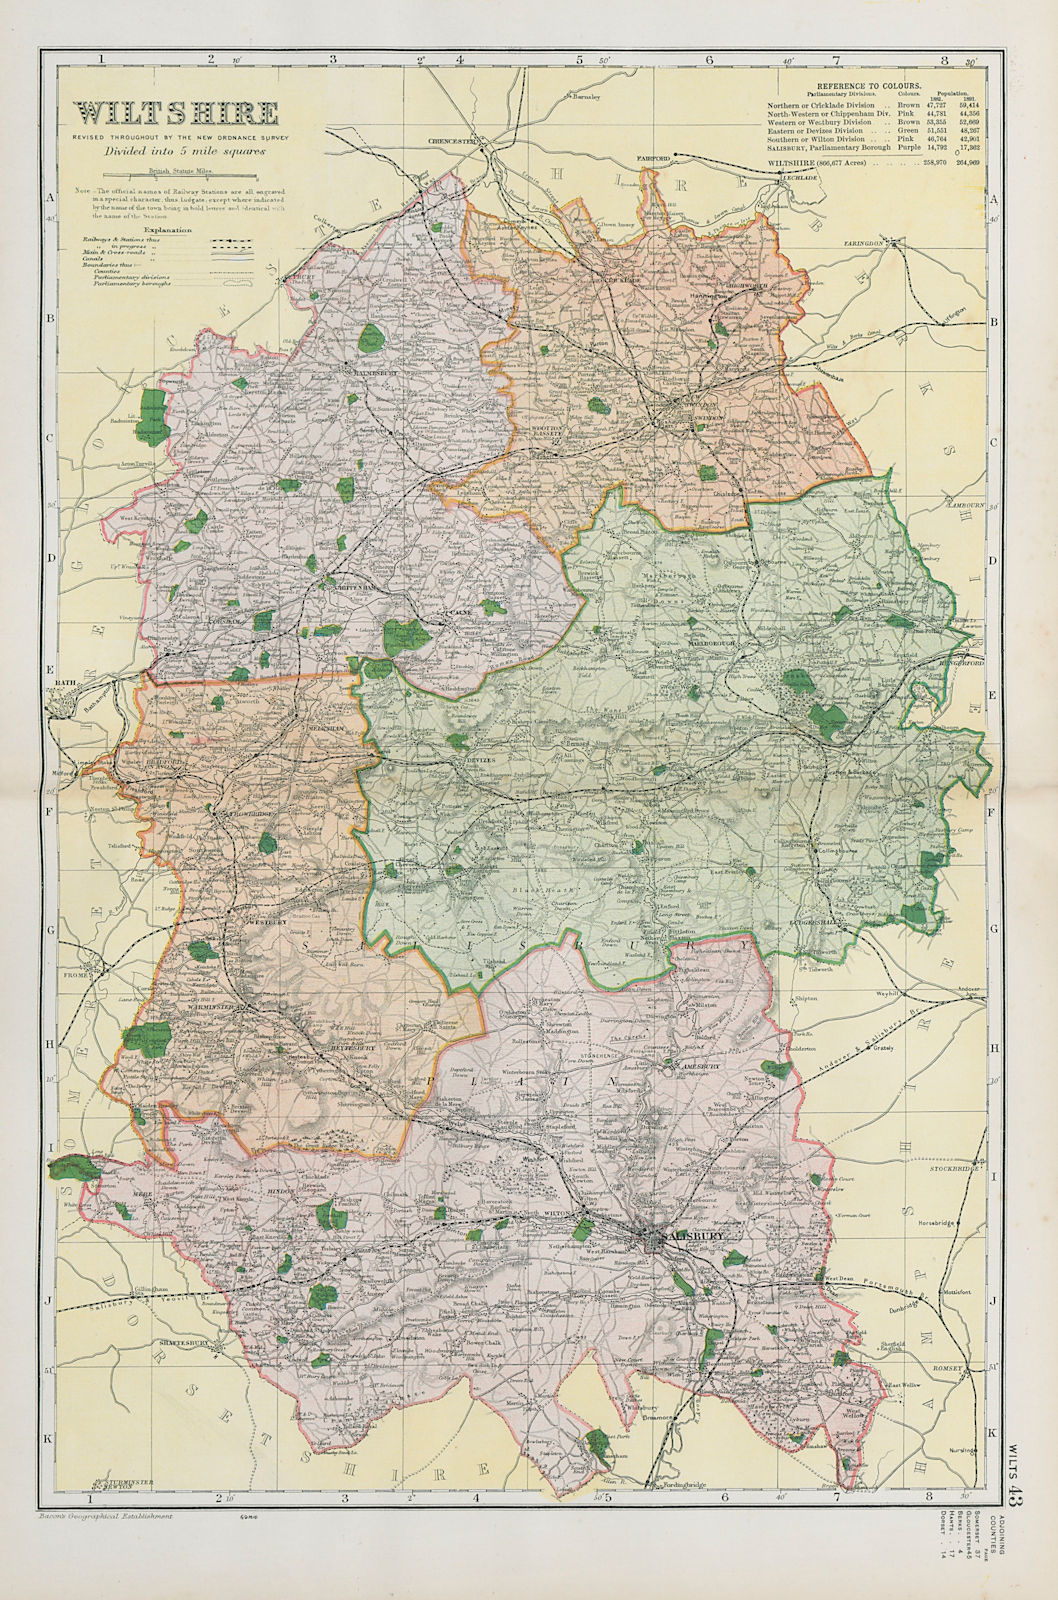 WILTSHIRE. Showing Parliamentary divisions, boroughs & parks. BACON 1900 map